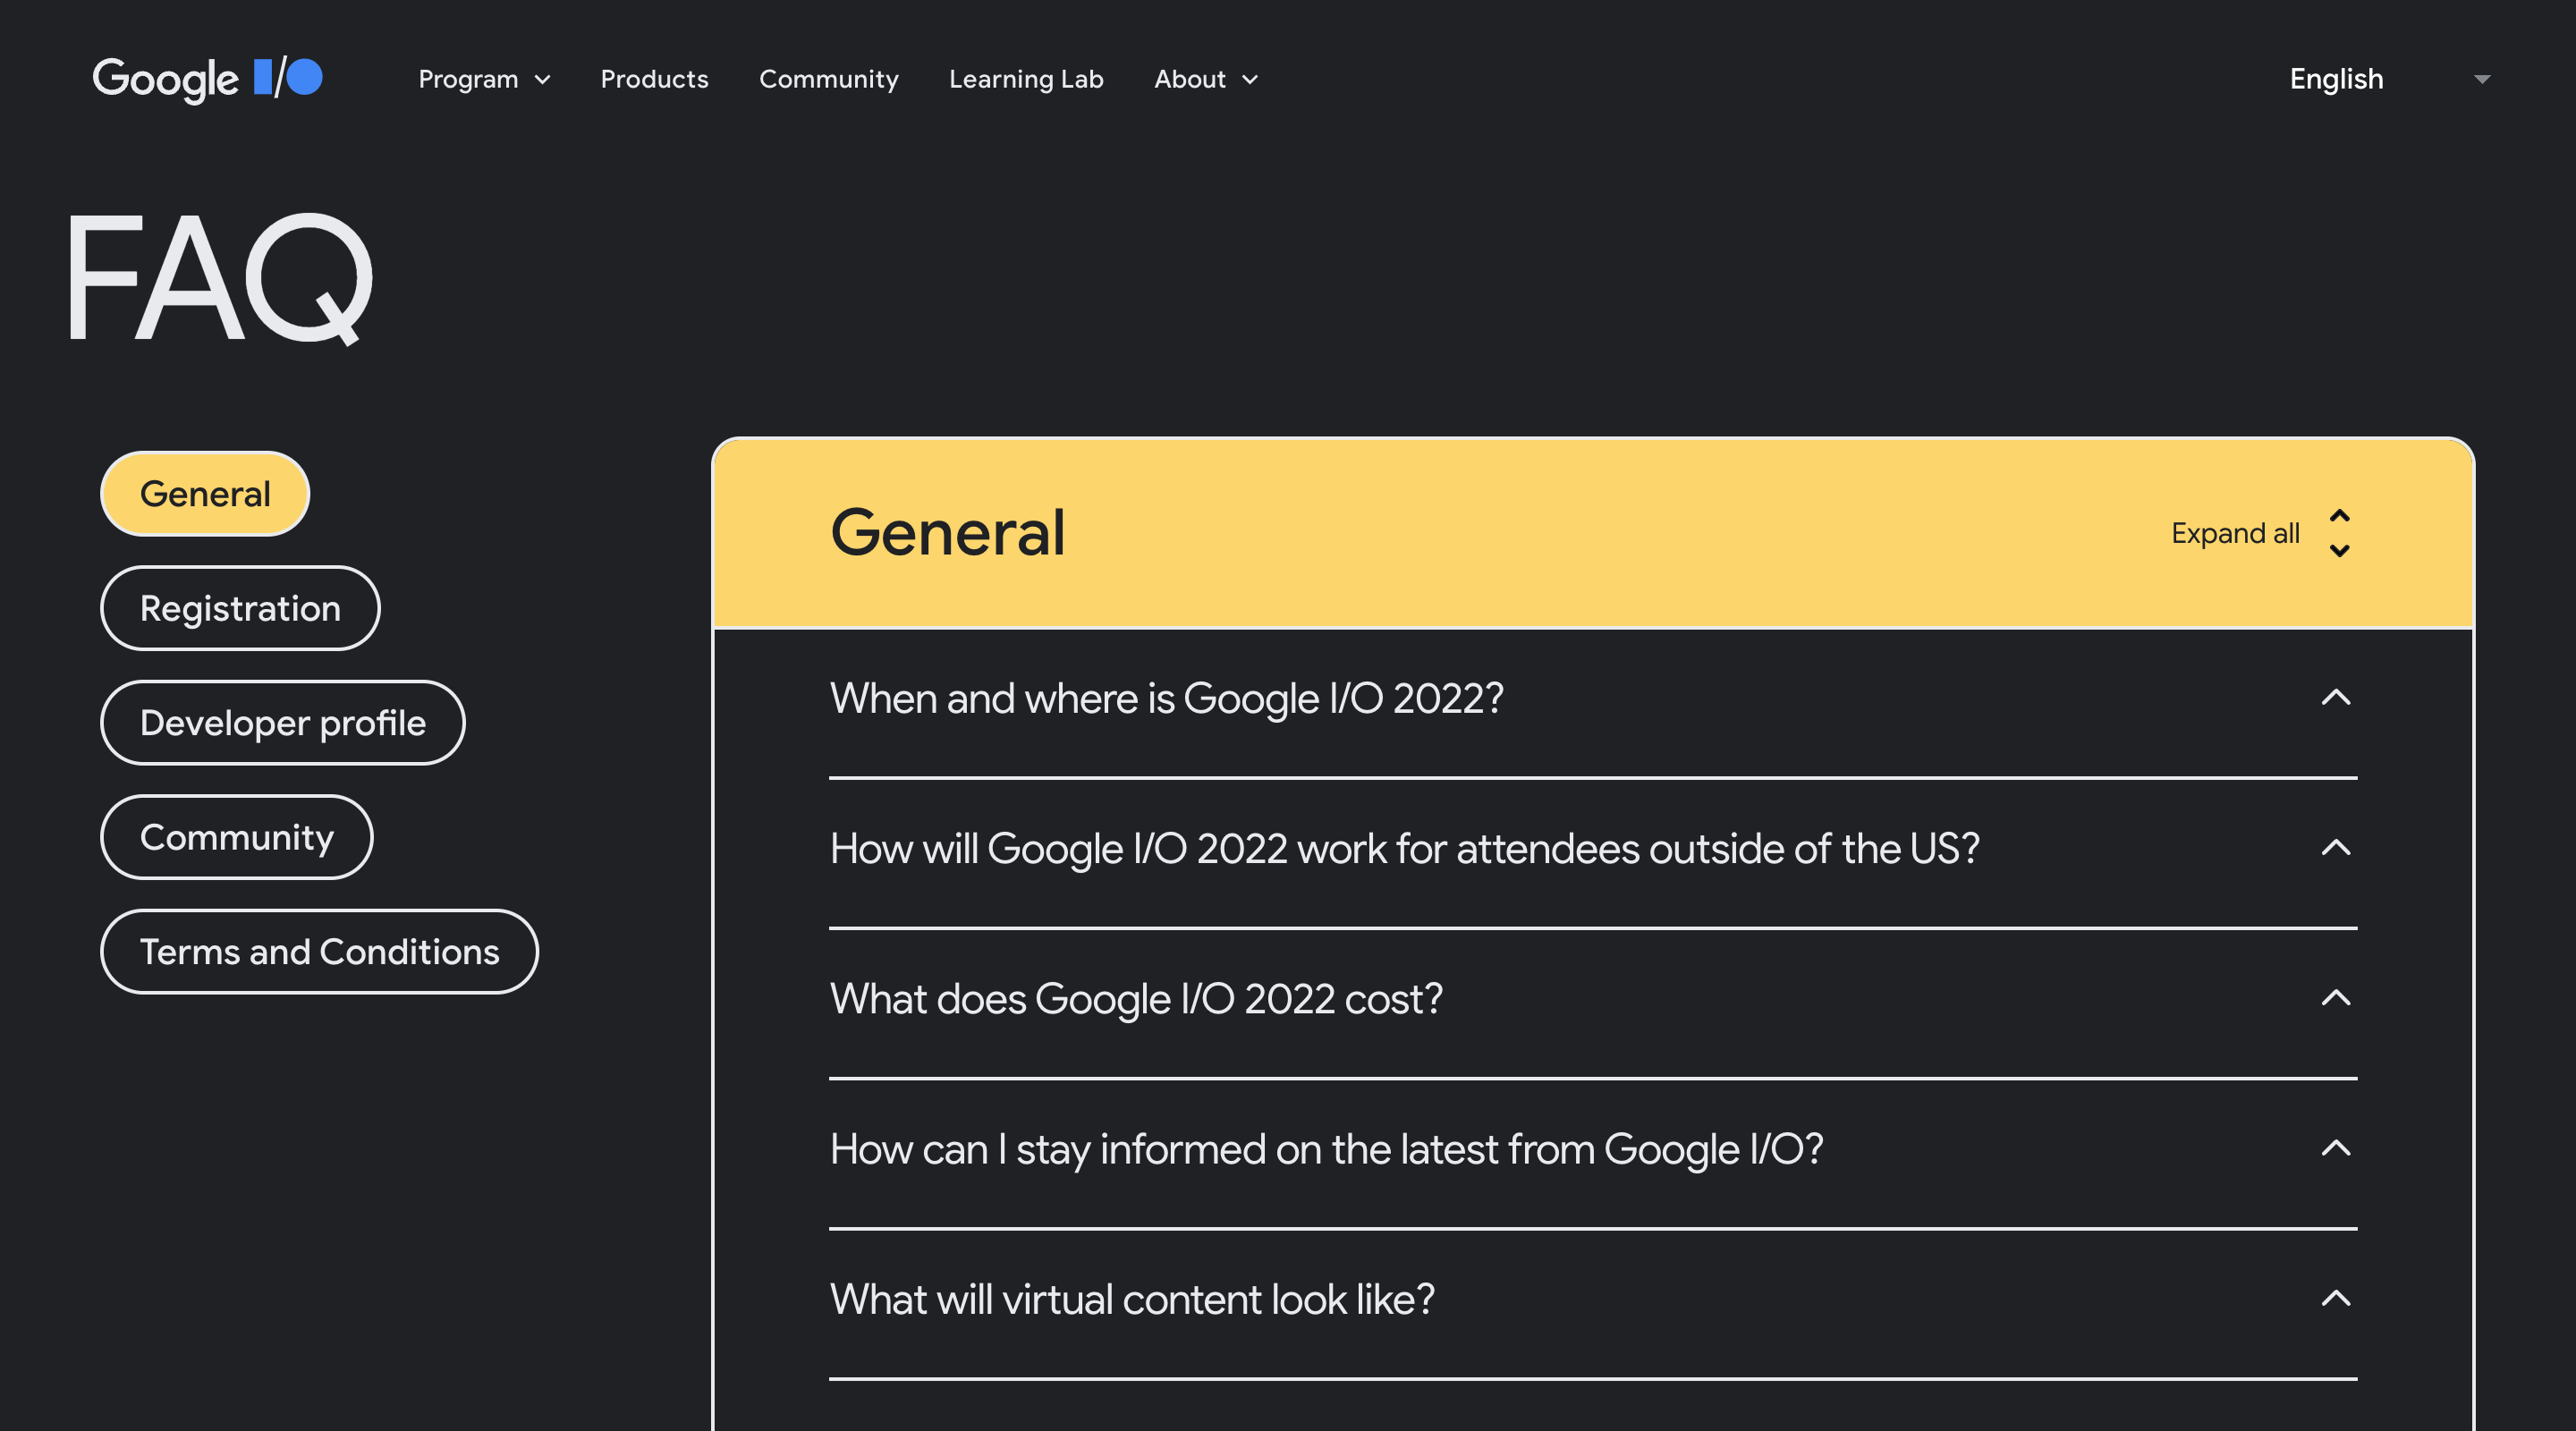 Screenshot of the Google I/O 2022 'FAQ' page. A list of FAQ categories is displayed on the left side of the screen. On the right side the 'General' category is shown with a list of questions such as 'When and where is Google I/) 2022?'.